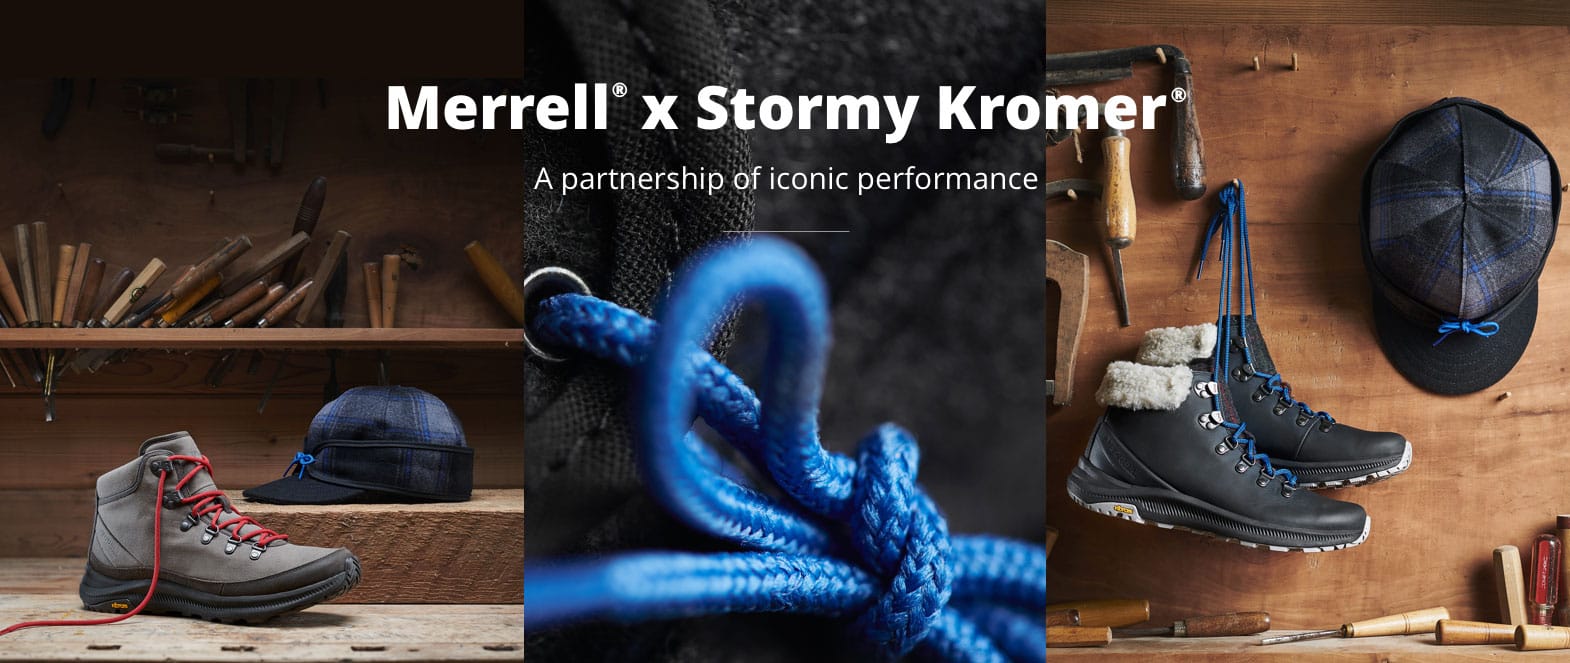 Merrell and Stormy a partnership of iconic performance.